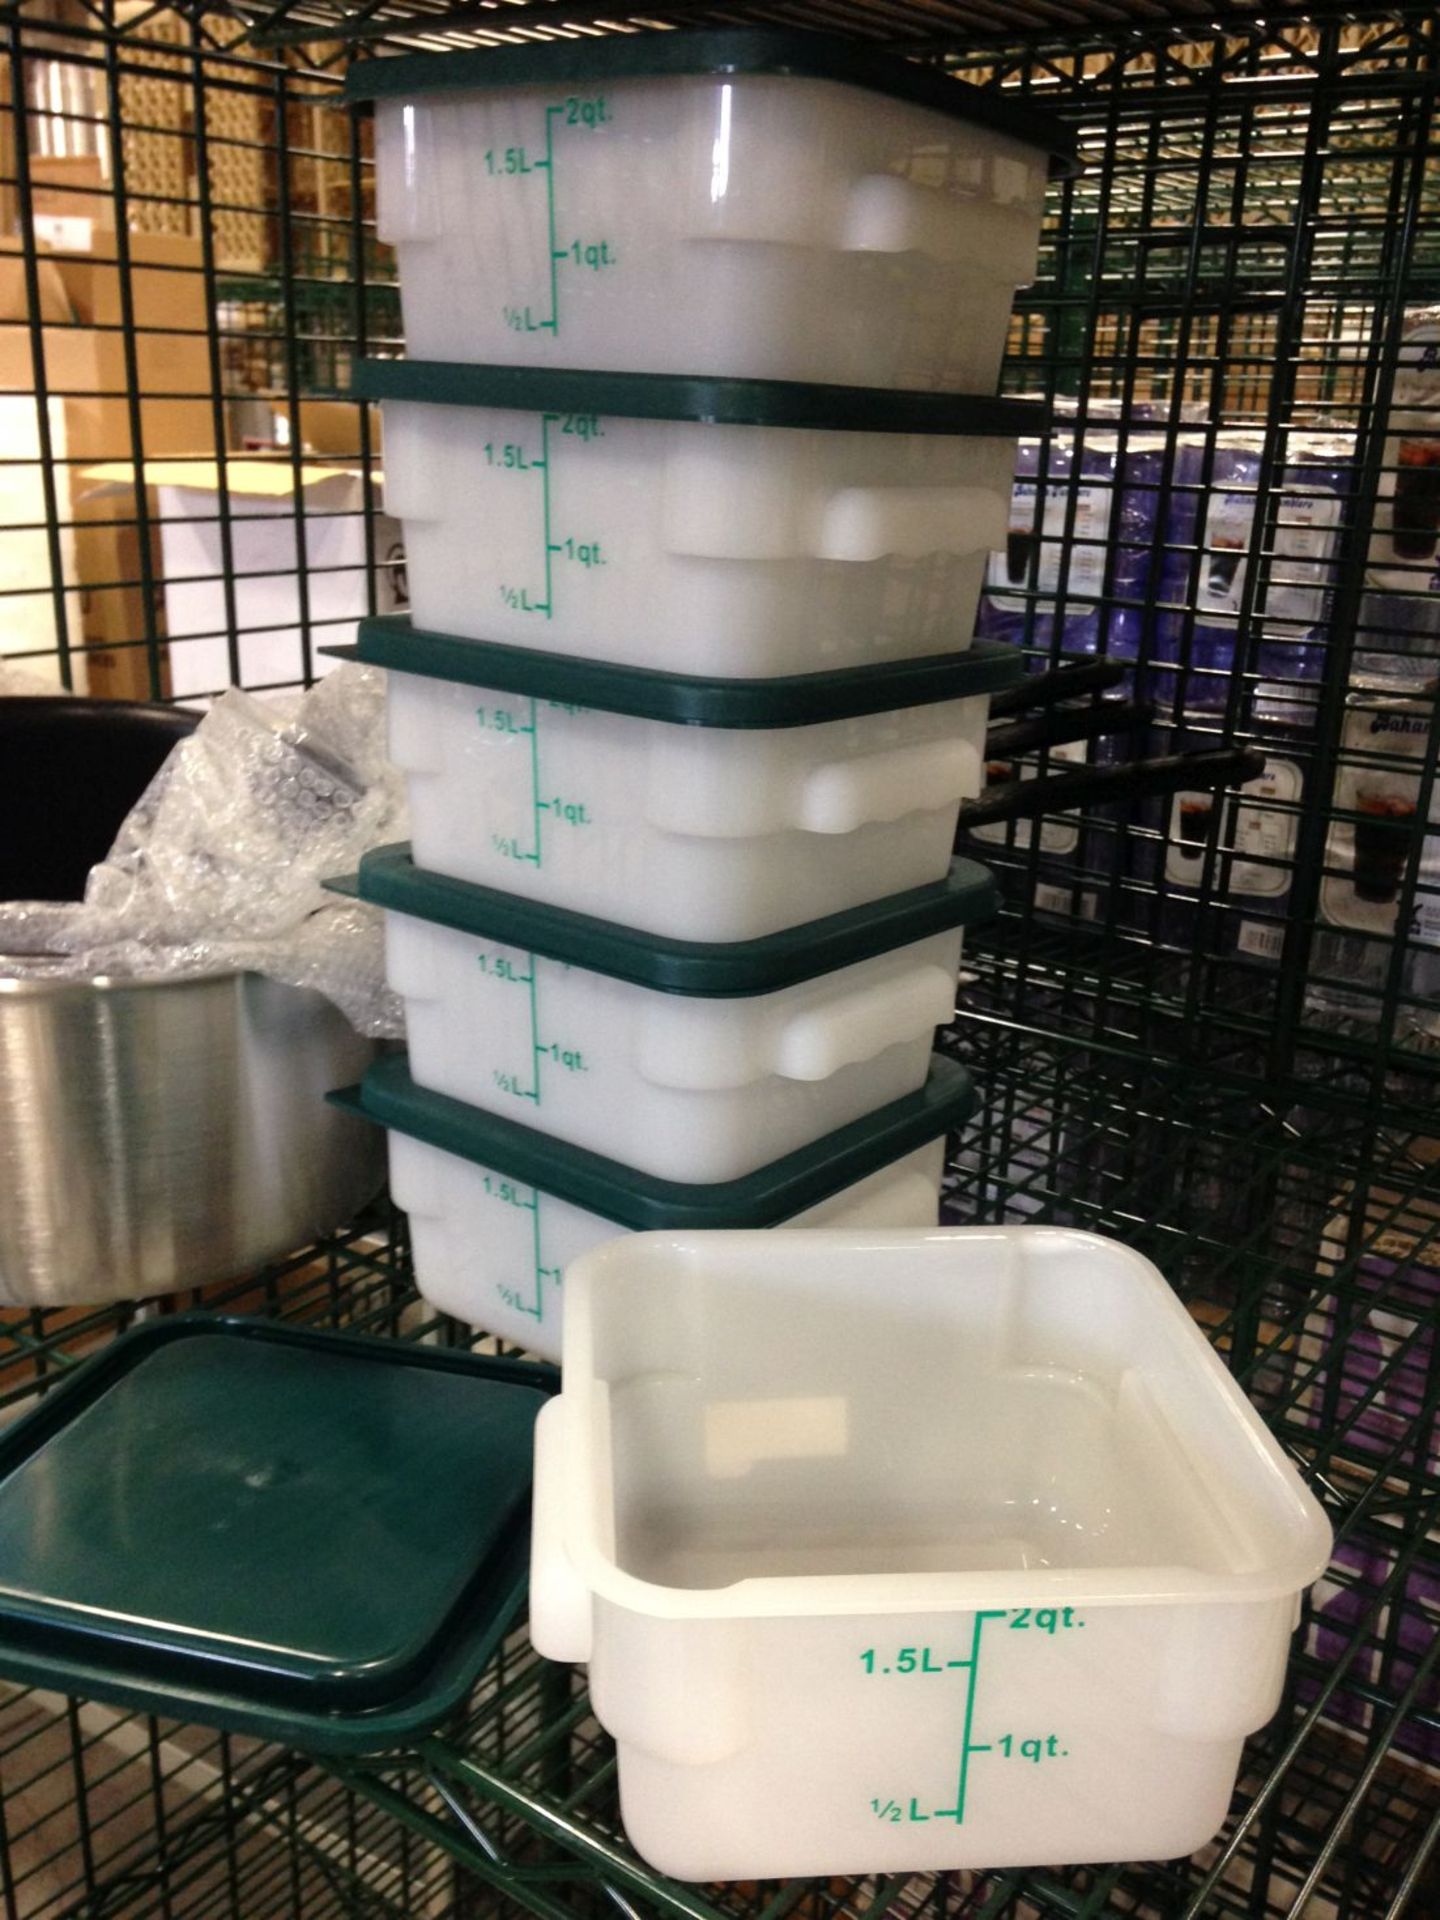 2qt Ingredient Bins with Lids - Lot of 6